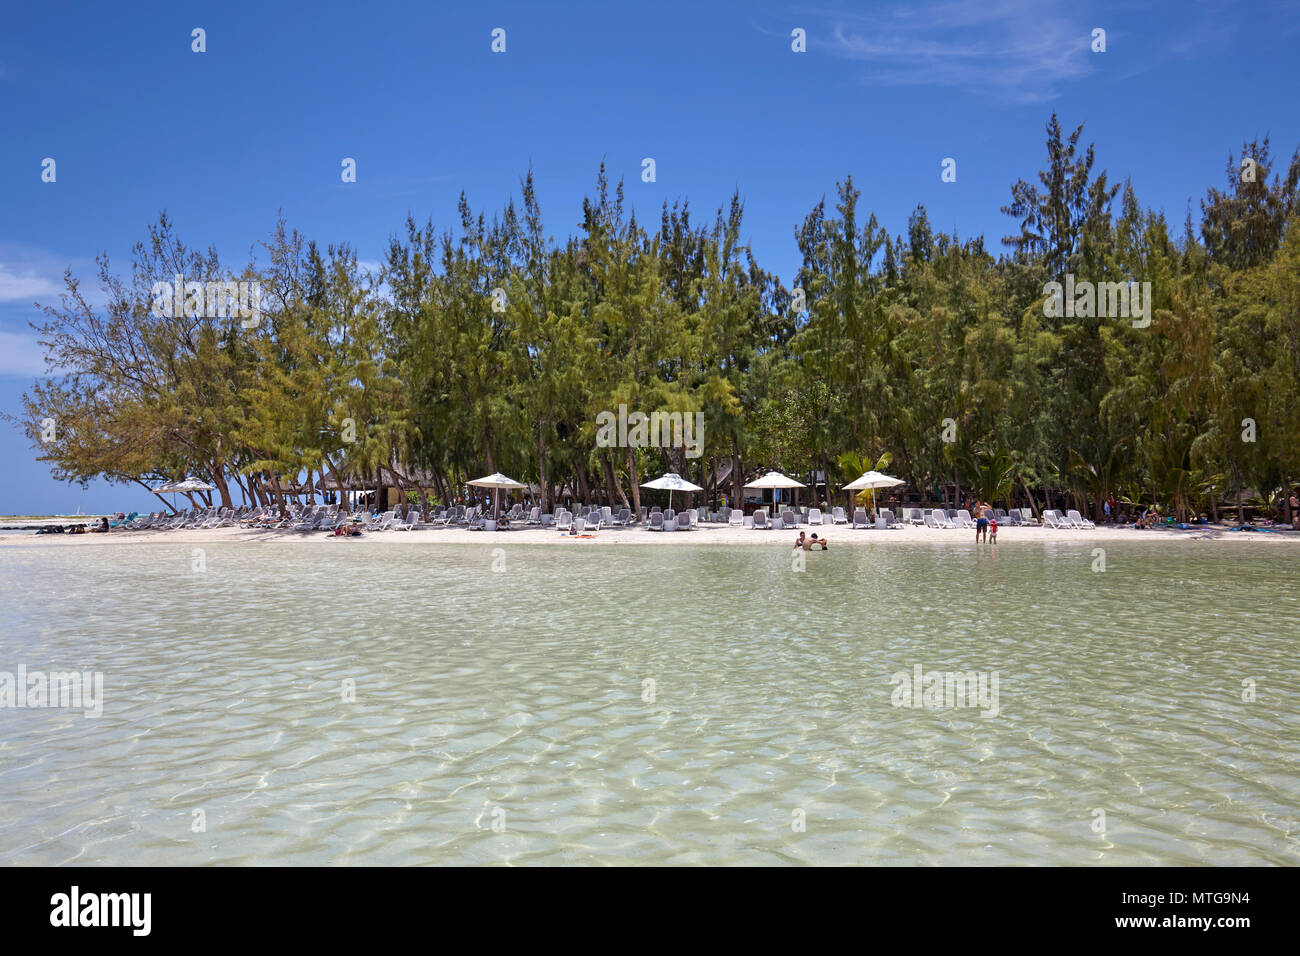 The clear water and white beaches in Ile aux Cerfs, Mauritius Stock Photo